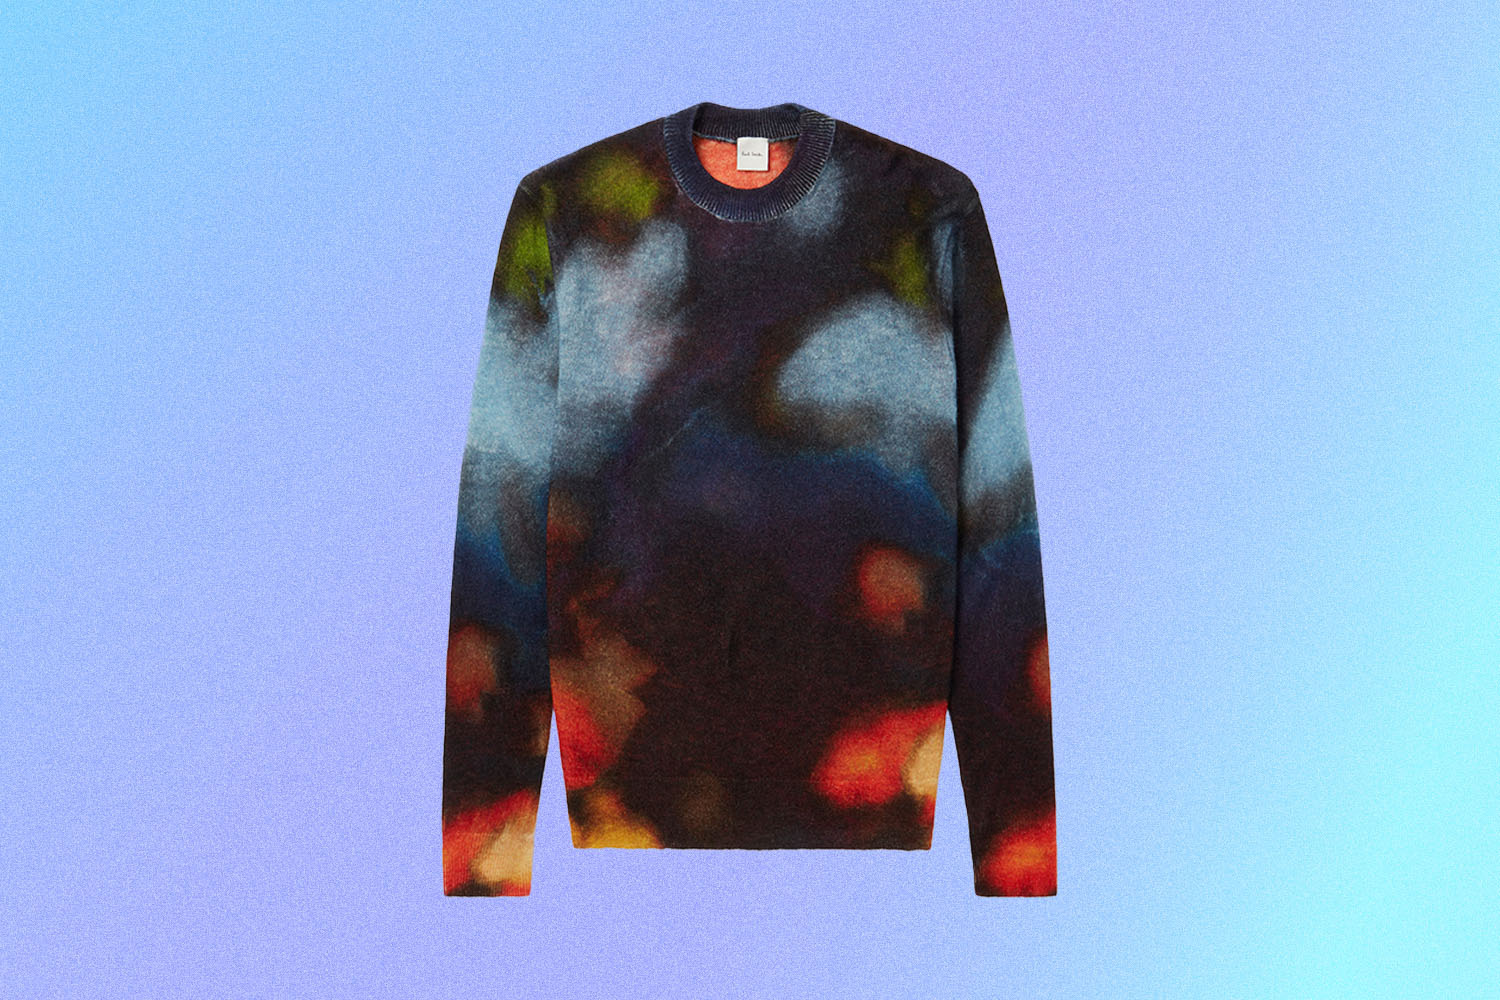 a black with "ink spill" sloshes sweater on a multi-colored blue-purple background